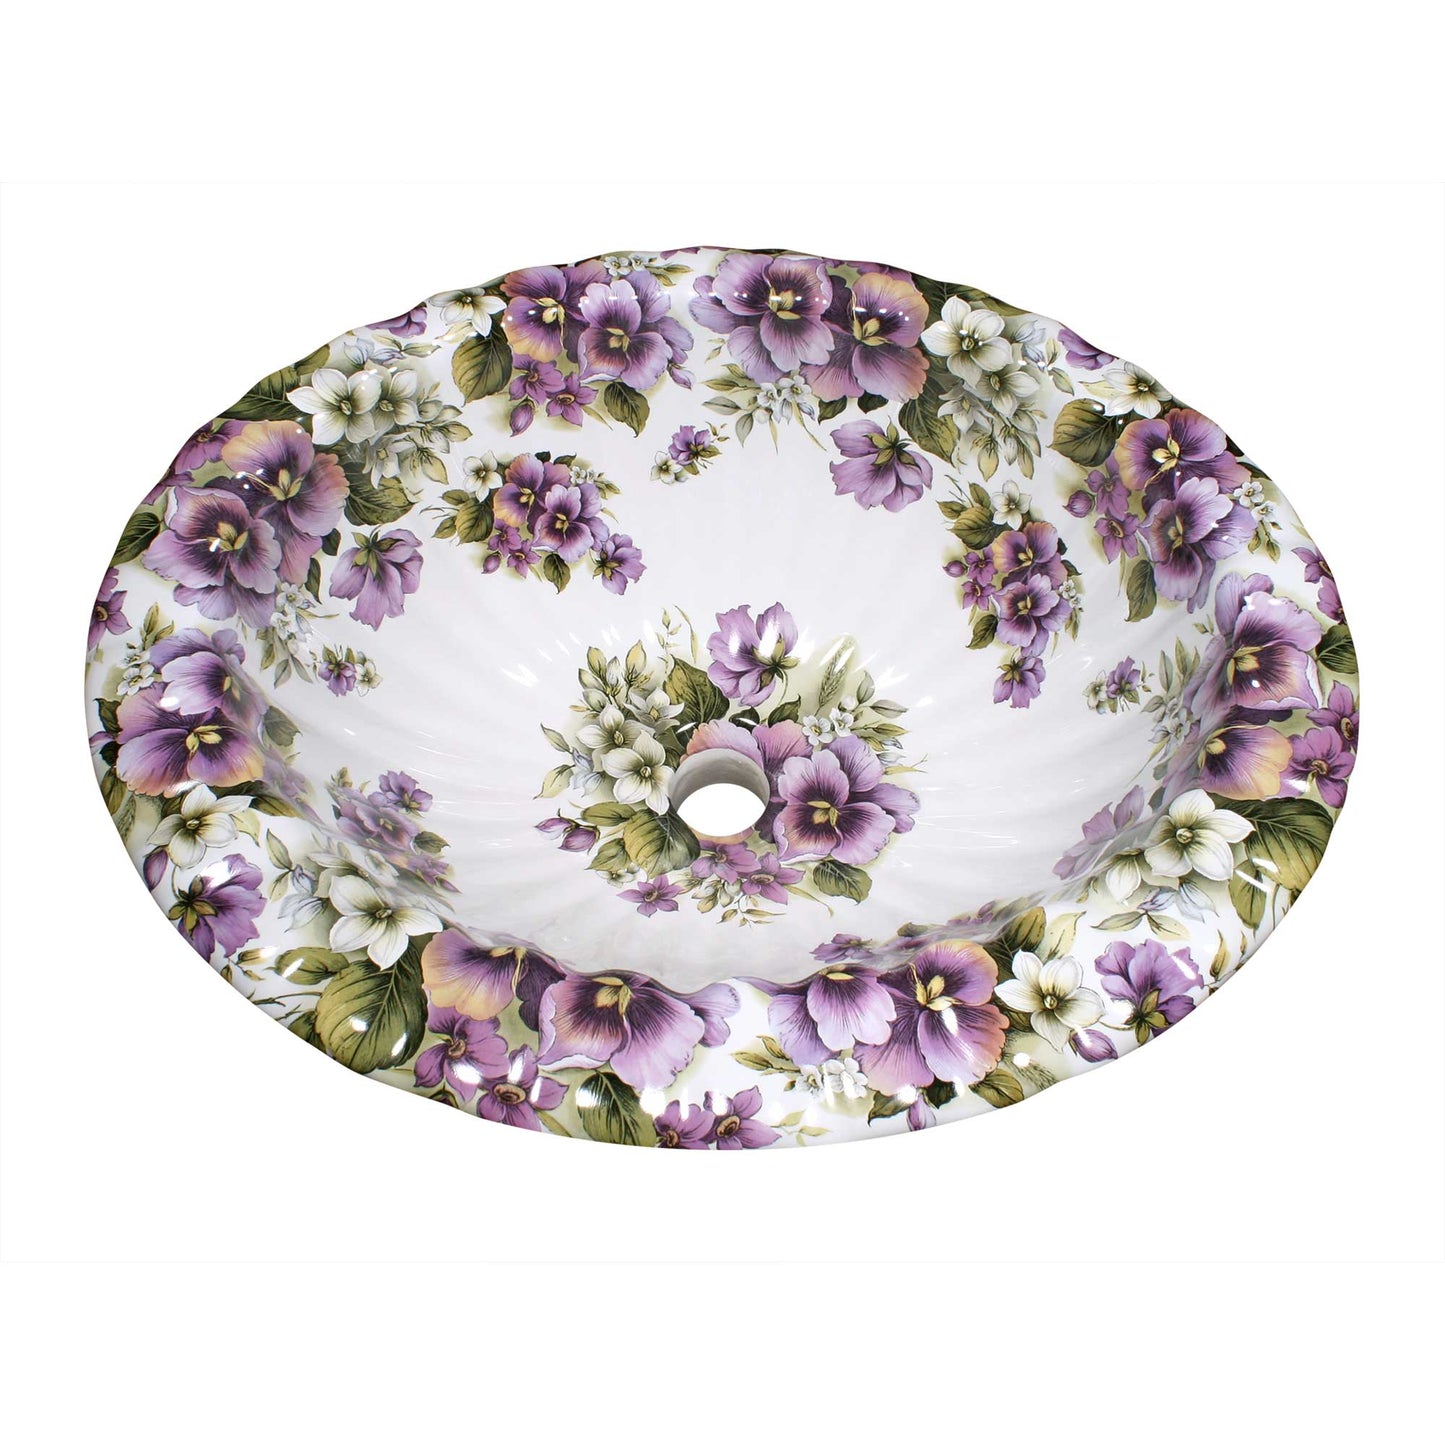 Scalloped edge drop-in sink painted with purple pansies